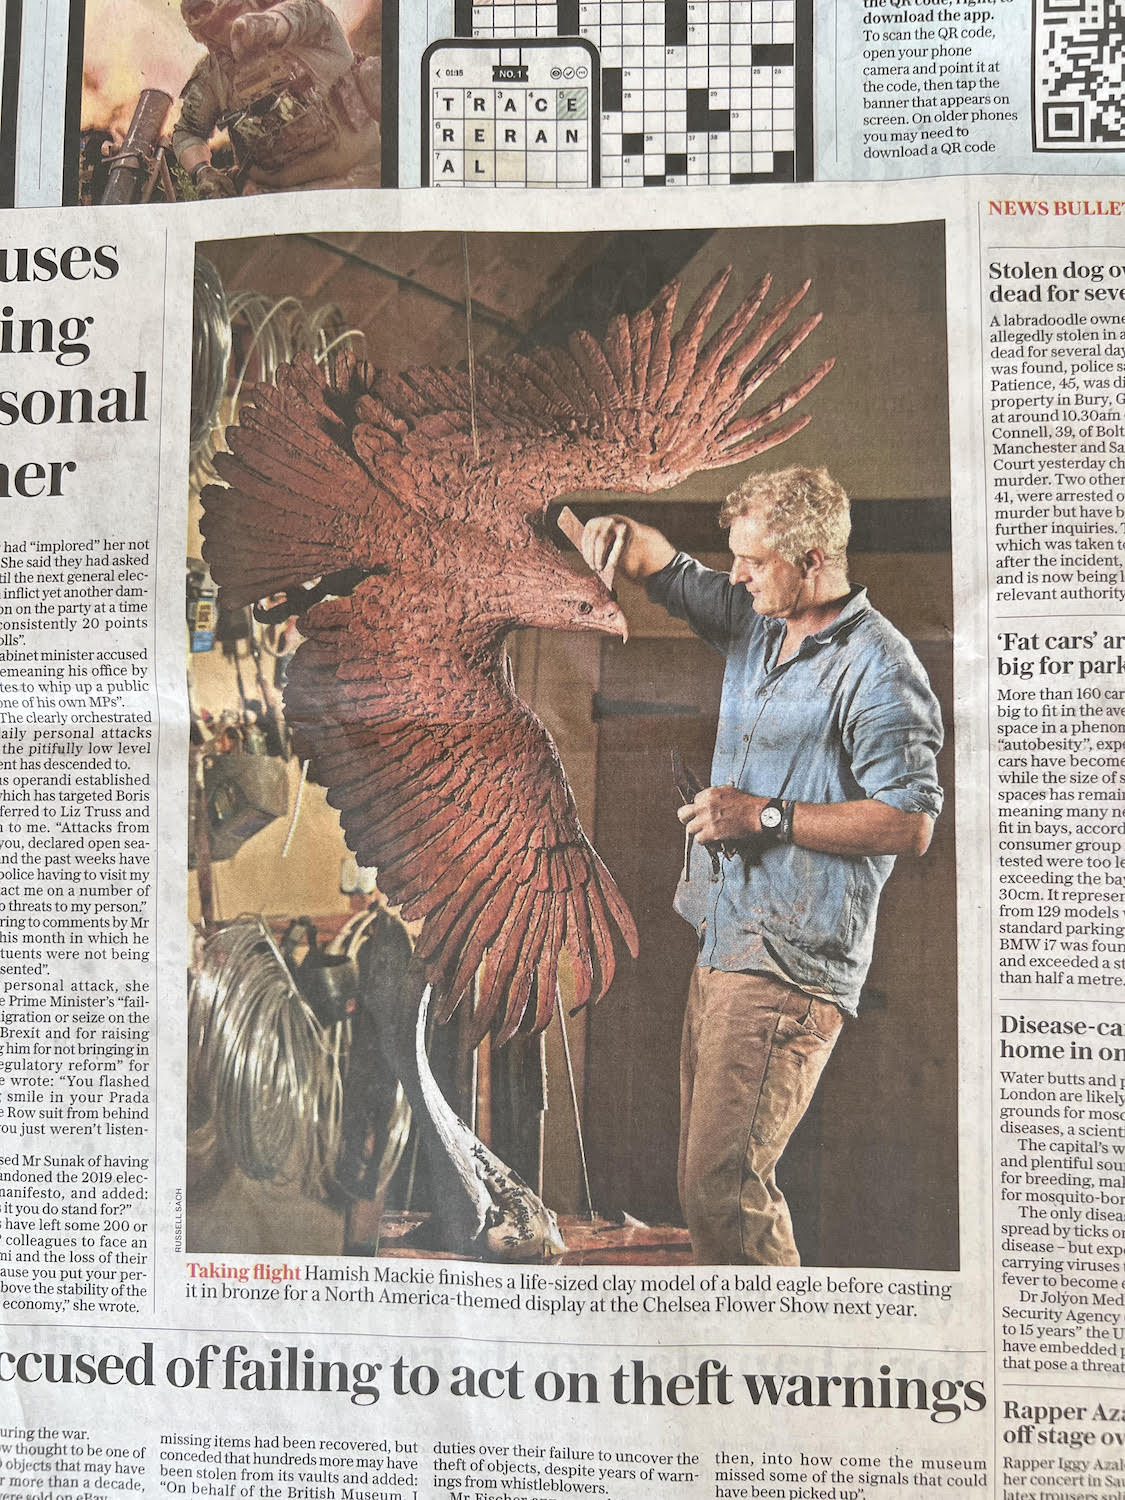 Hamish Mackie with Bald Eagle in Sunday Telegraph